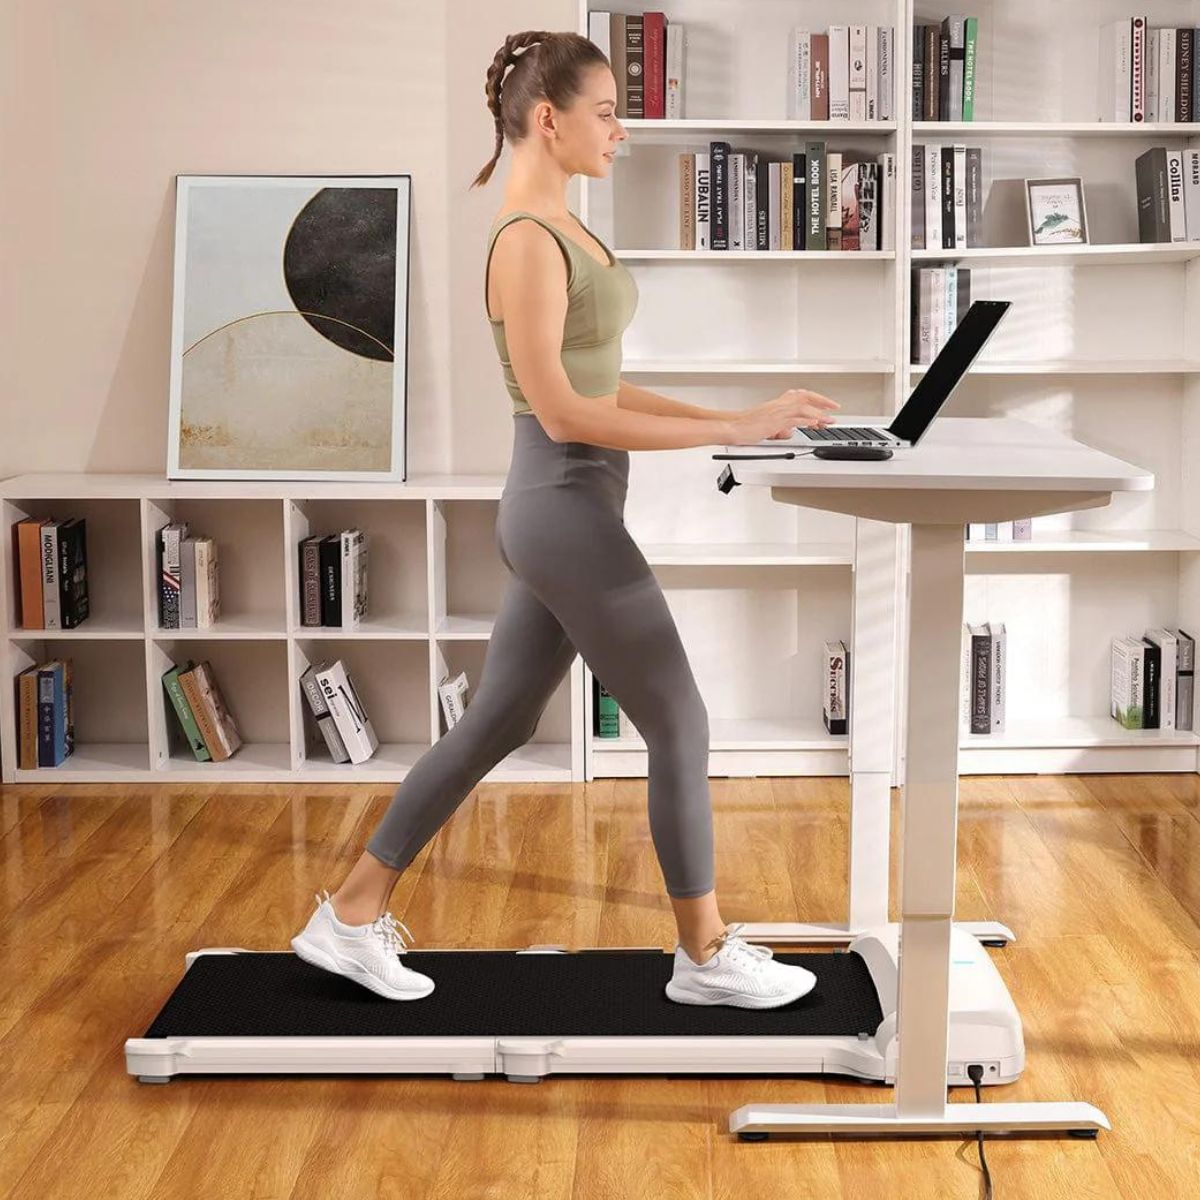 The Best Walking Pads & Under-Desk Treadmills for Your Home Office